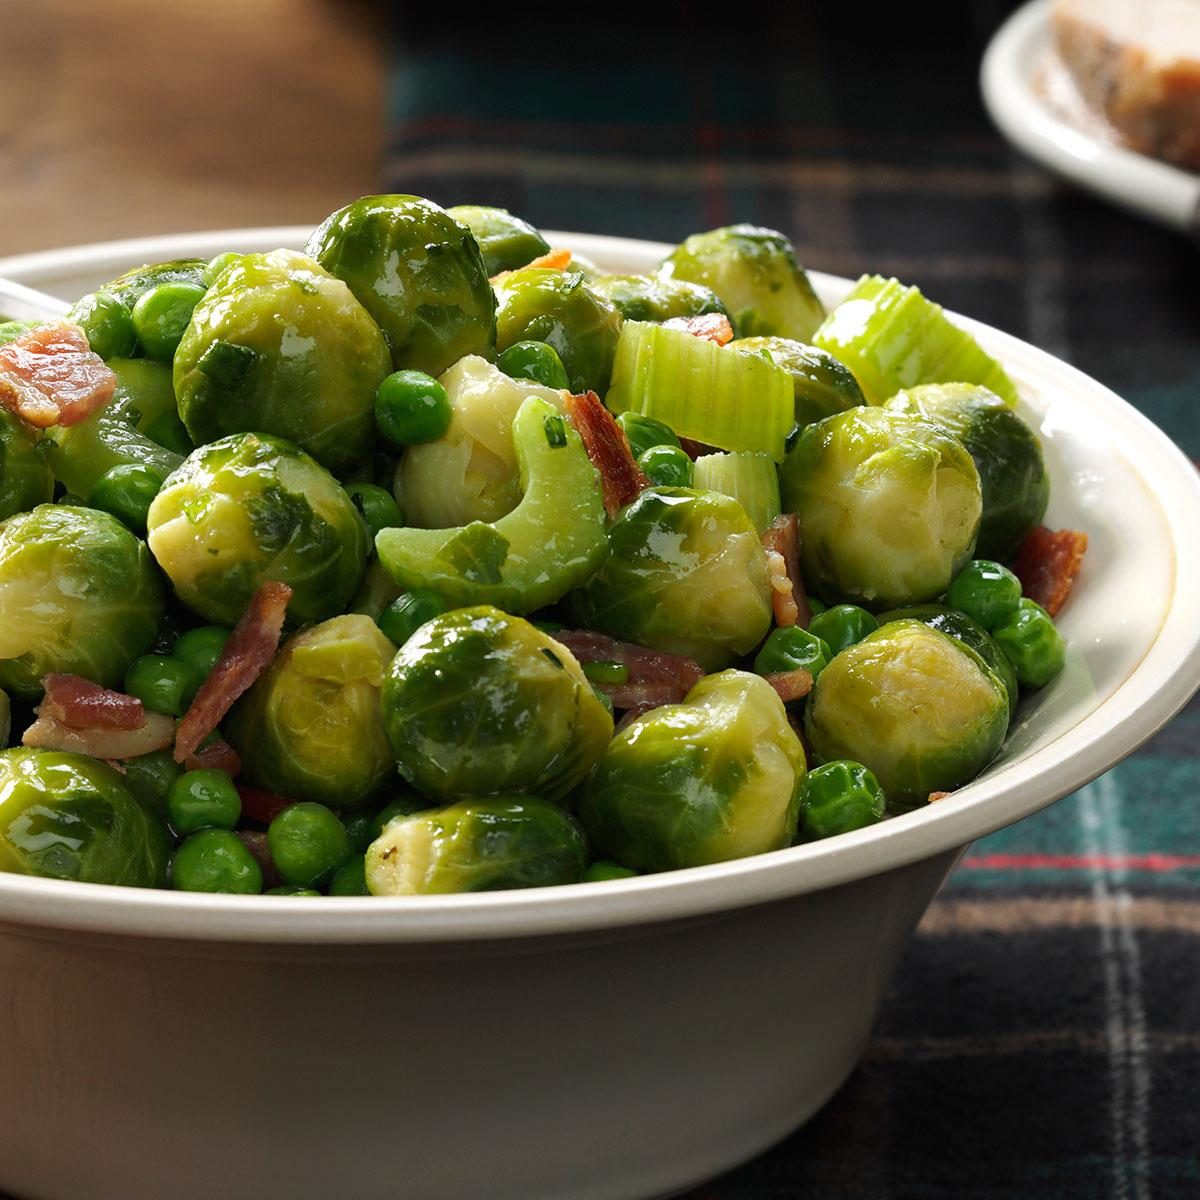 Holiday Brussels Sprouts Exps41471 Sd142780b08 13 4bc Rms 1